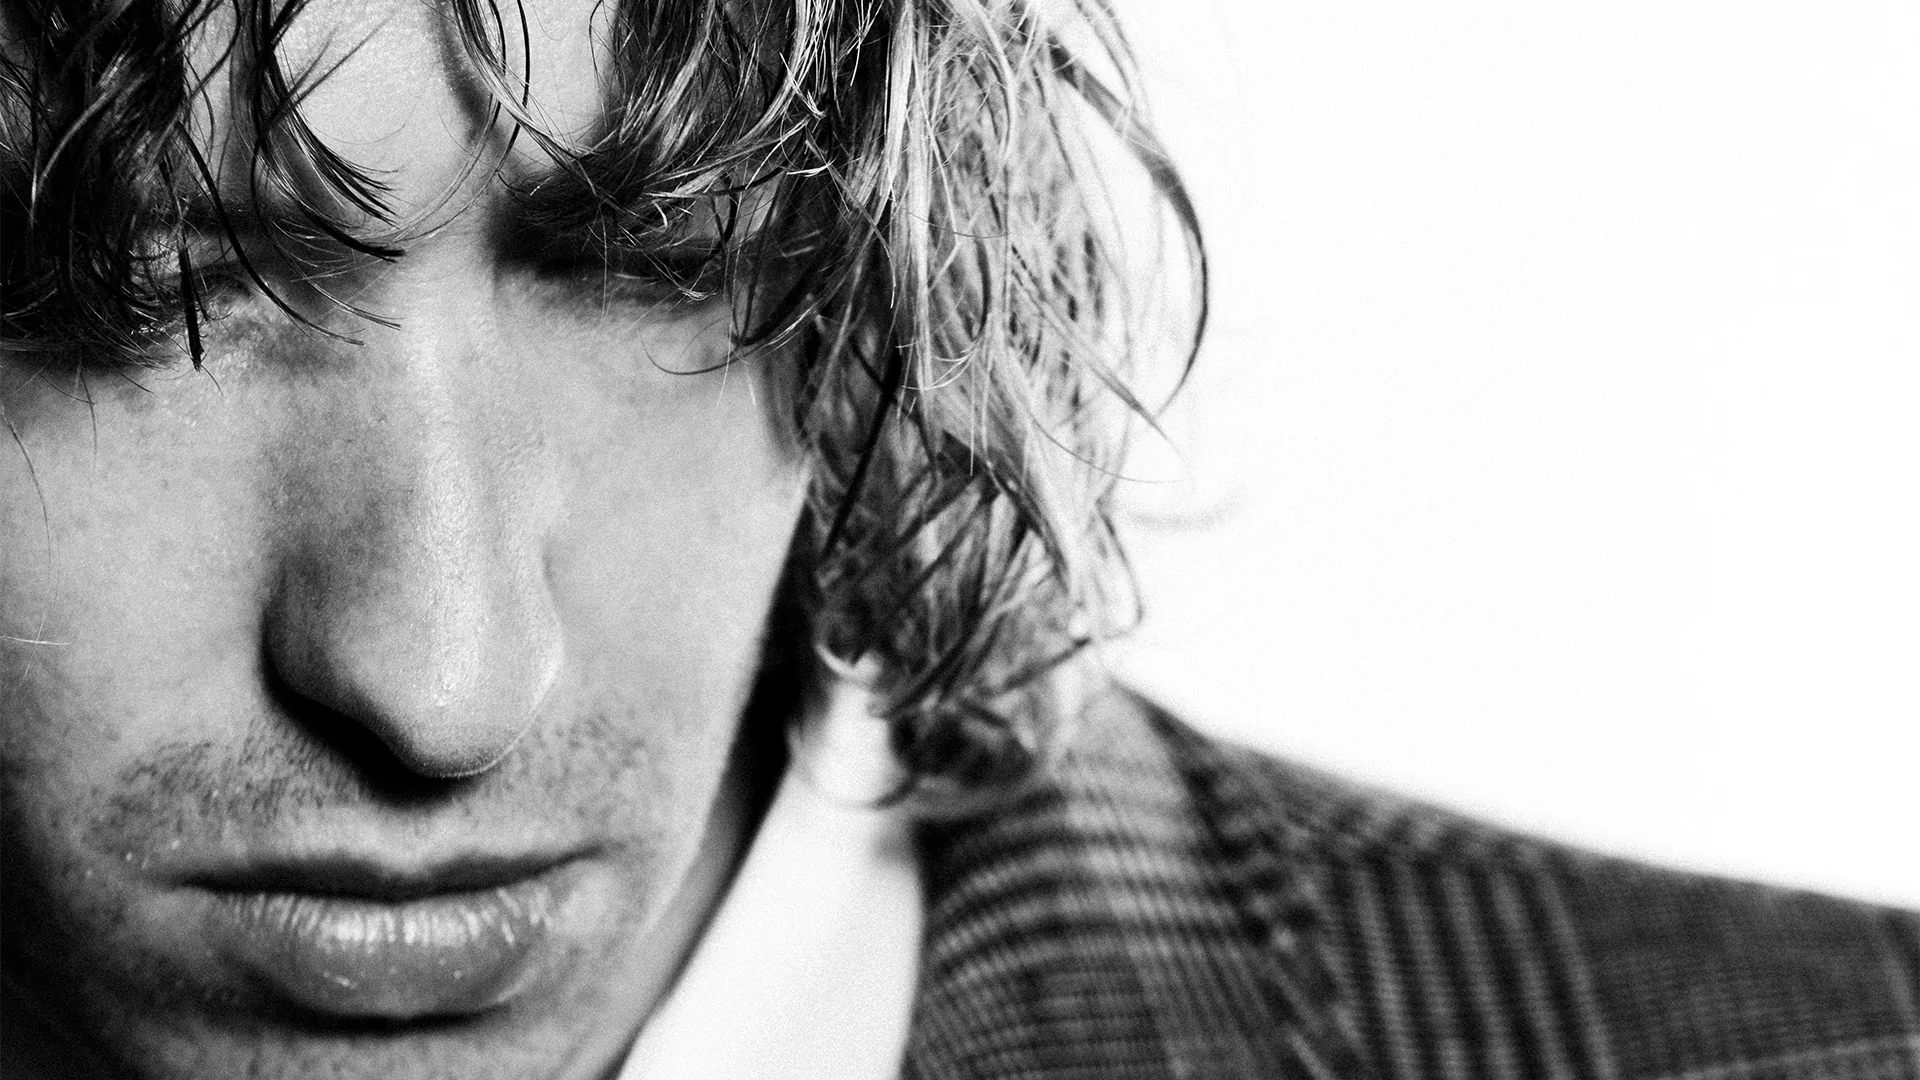 A close up black and white shot of daniel avery's face, which is looking down